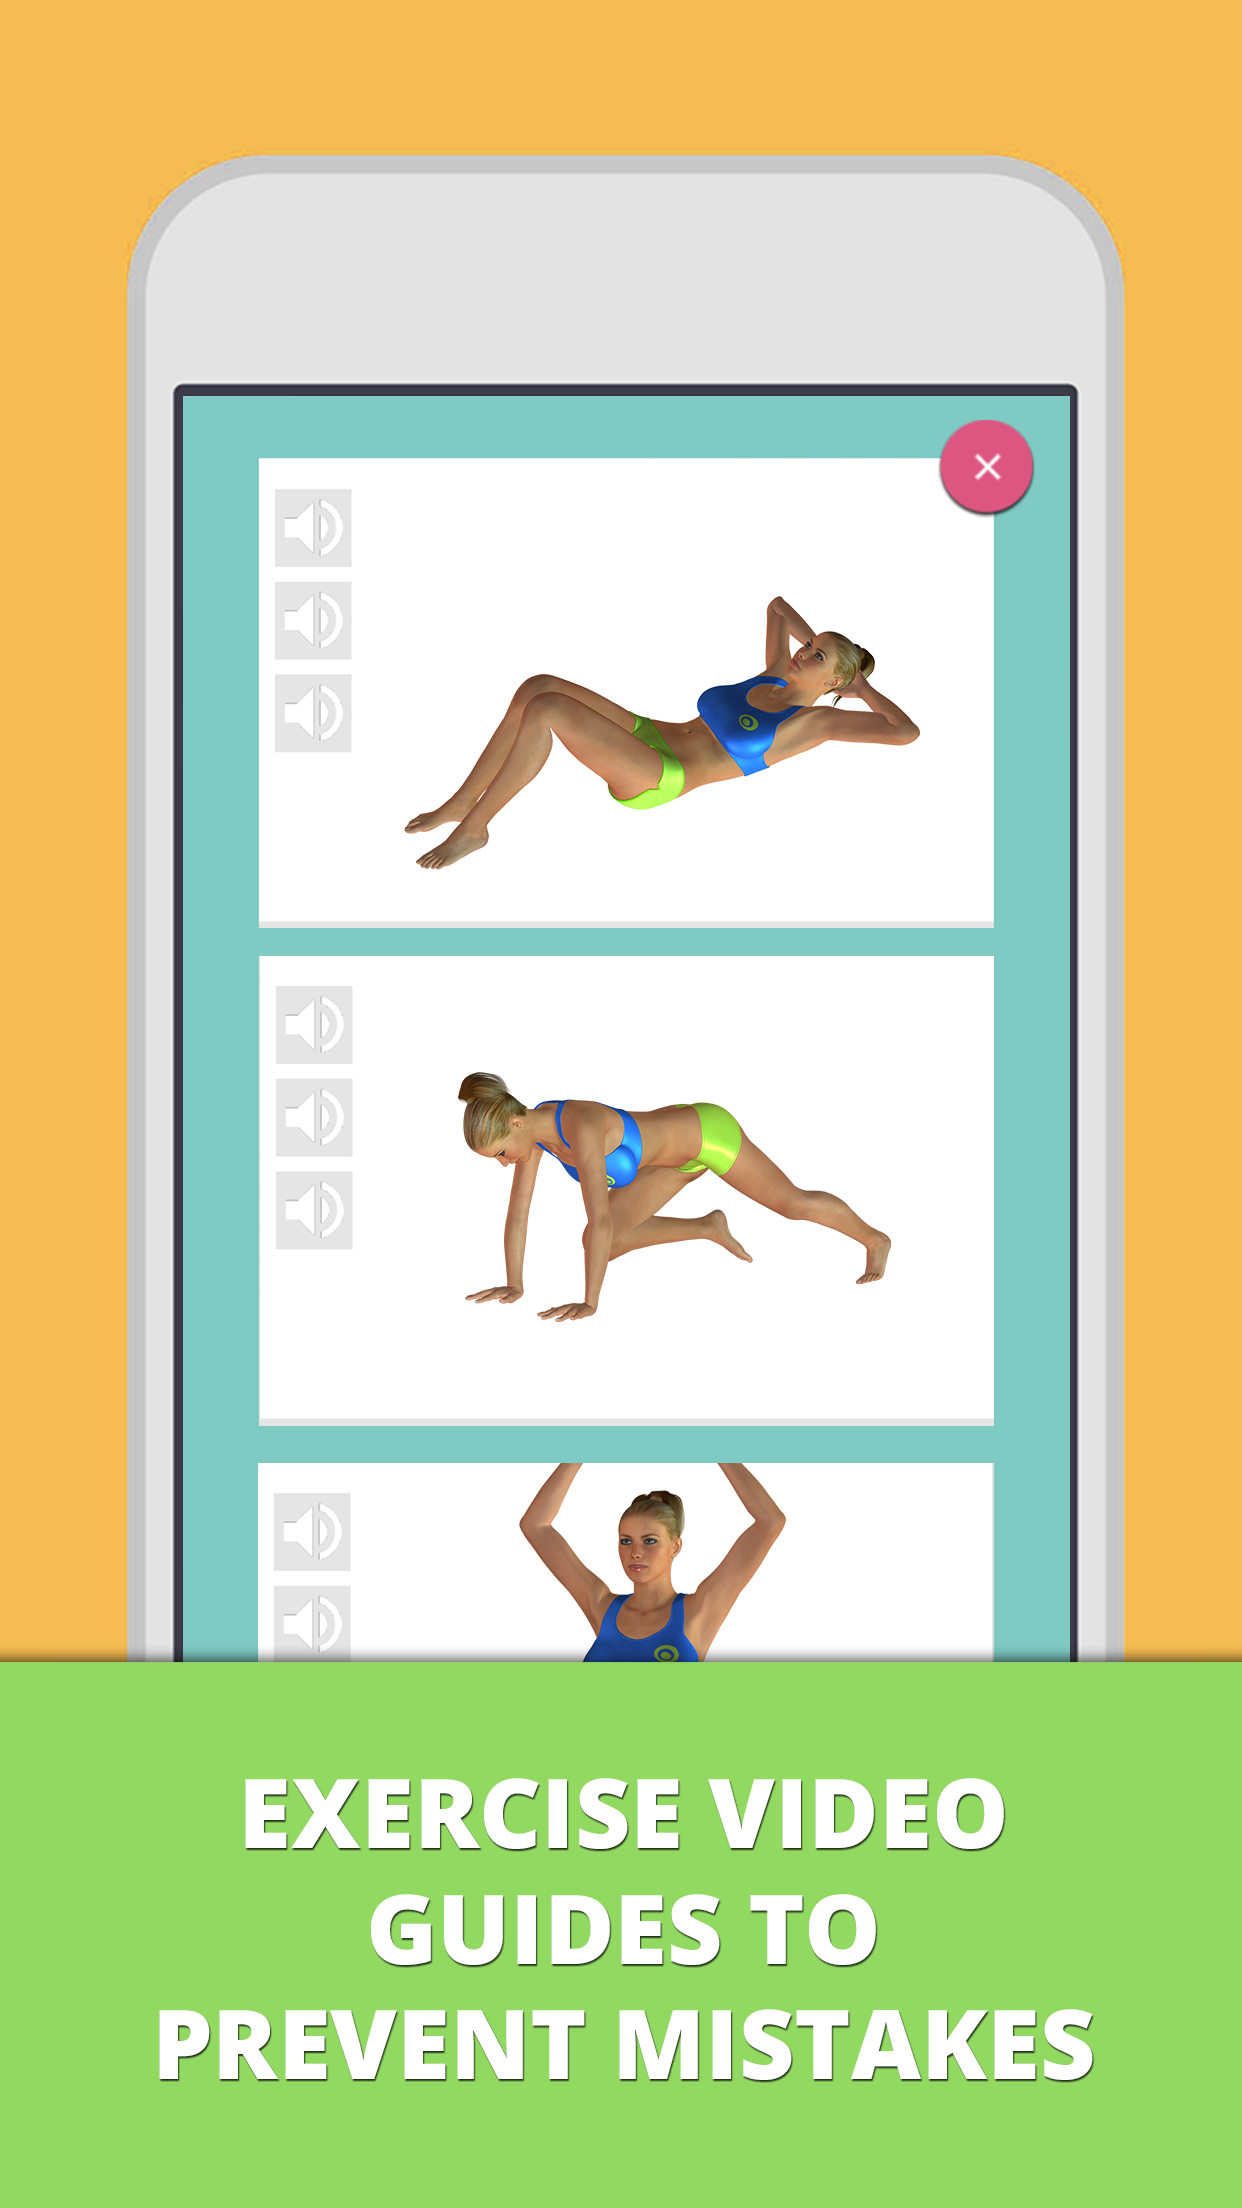 Android application 7 Minute Workout - Weight Loss screenshort